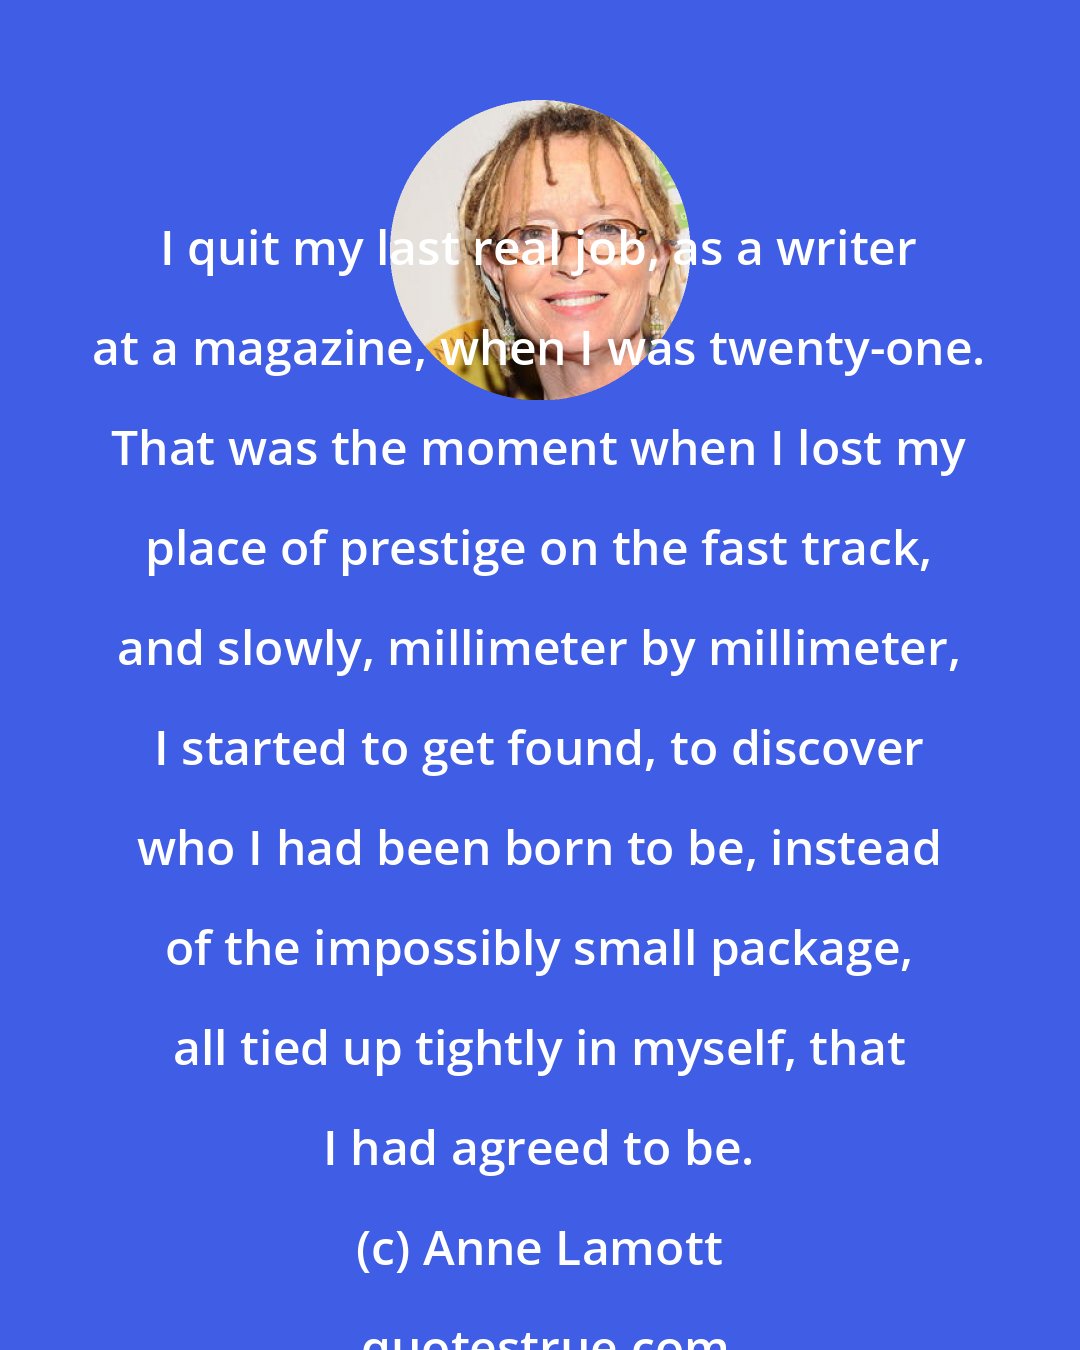 Anne Lamott: I quit my last real job, as a writer at a magazine, when I was twenty-one. That was the moment when I lost my place of prestige on the fast track, and slowly, millimeter by millimeter, I started to get found, to discover who I had been born to be, instead of the impossibly small package, all tied up tightly in myself, that I had agreed to be.